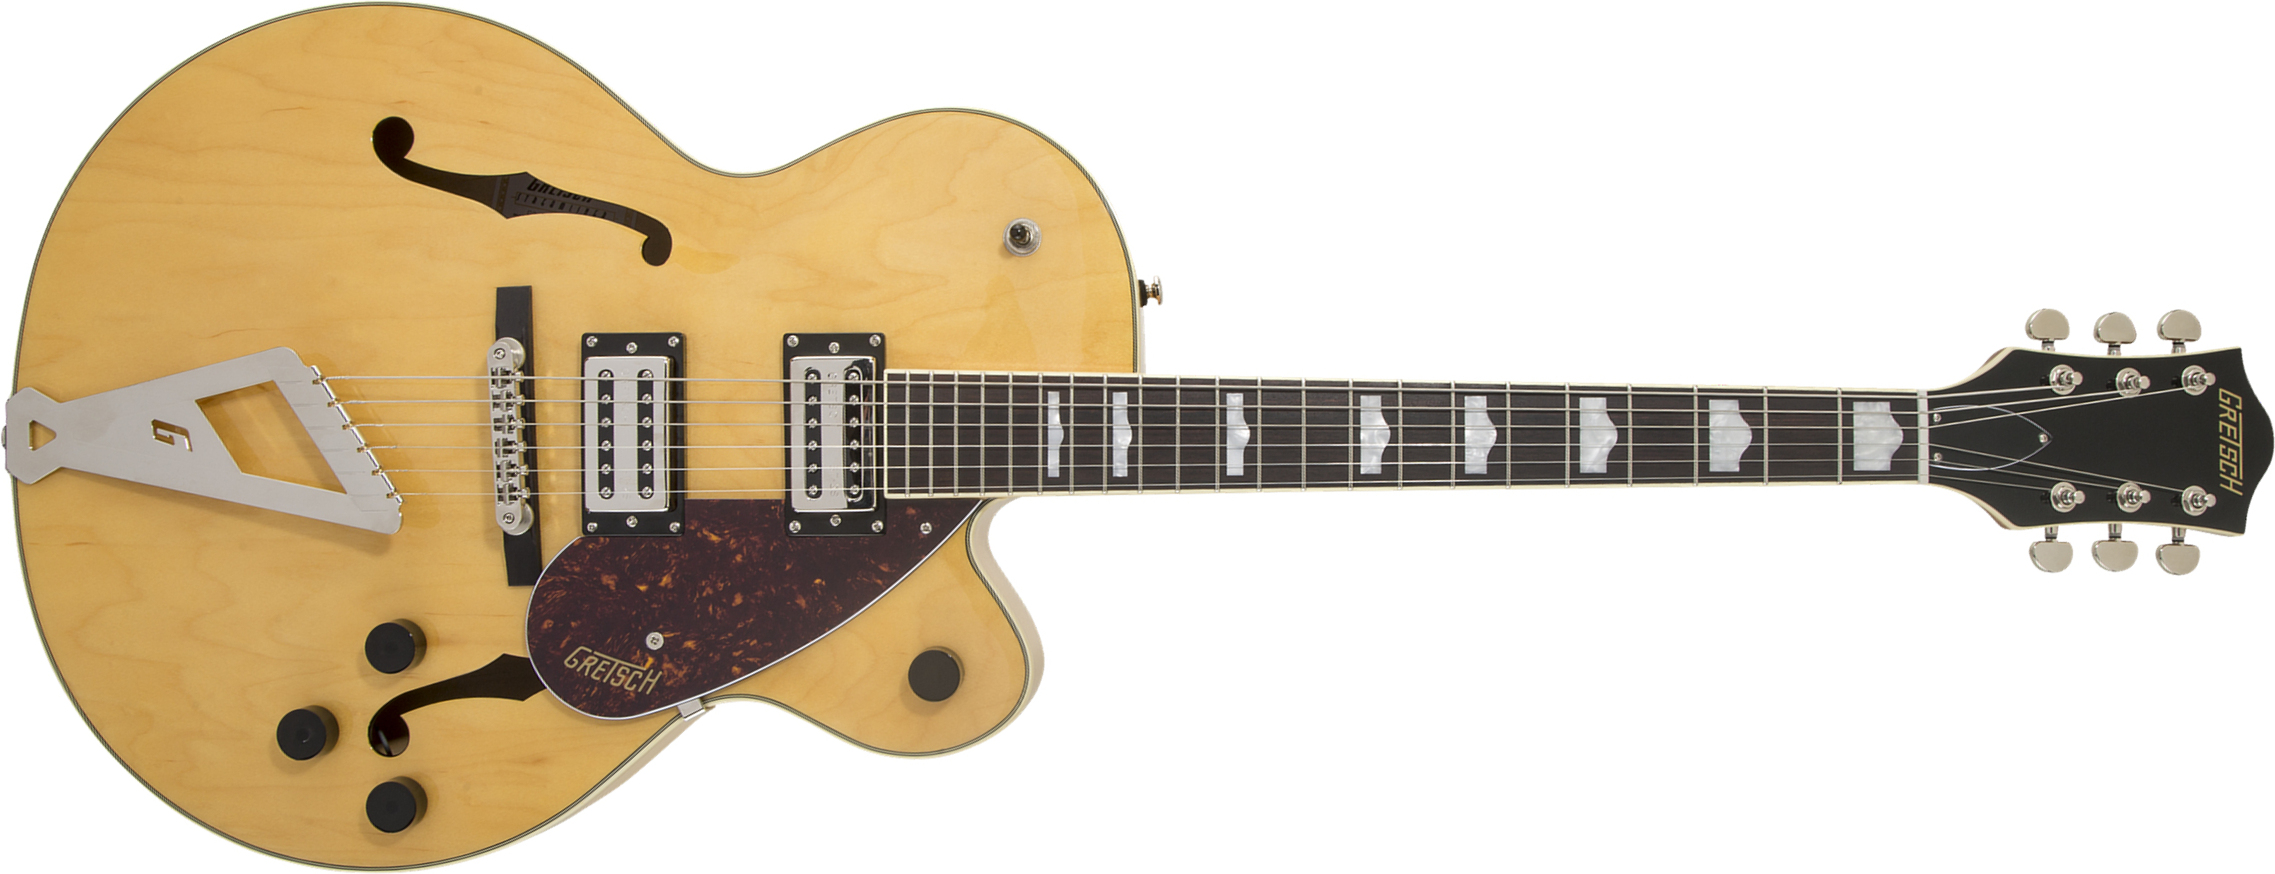 Gretsch G2420 Streamliner Hollow Body With Chromatic Ii Hh Ht Lau - Village Amber - Semi-Hollow E-Gitarre - Main picture